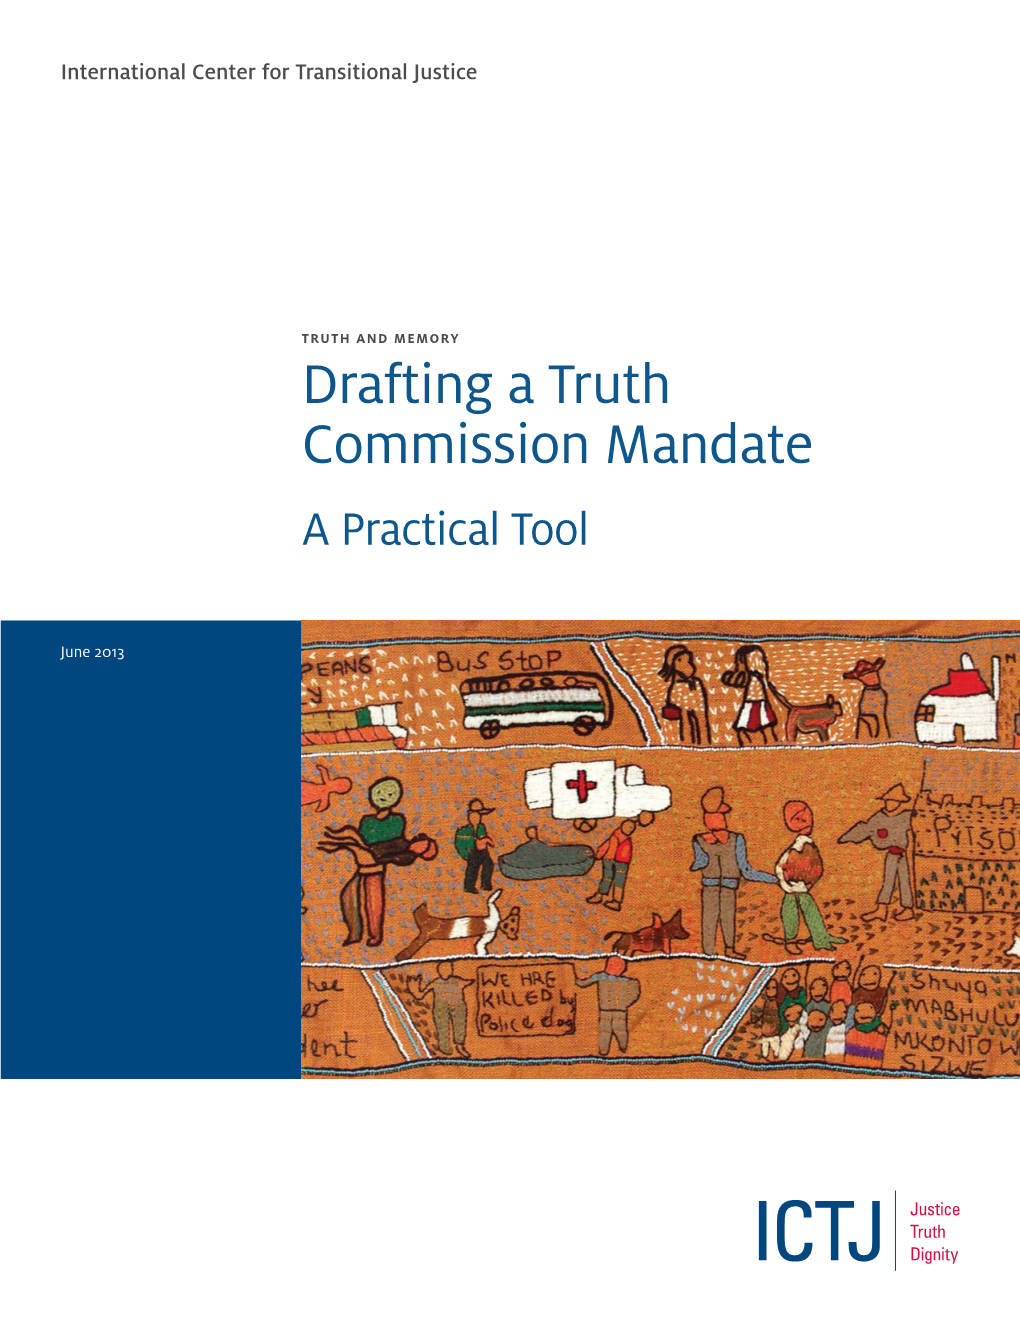 Truth Commission Mandate a Practical Tool